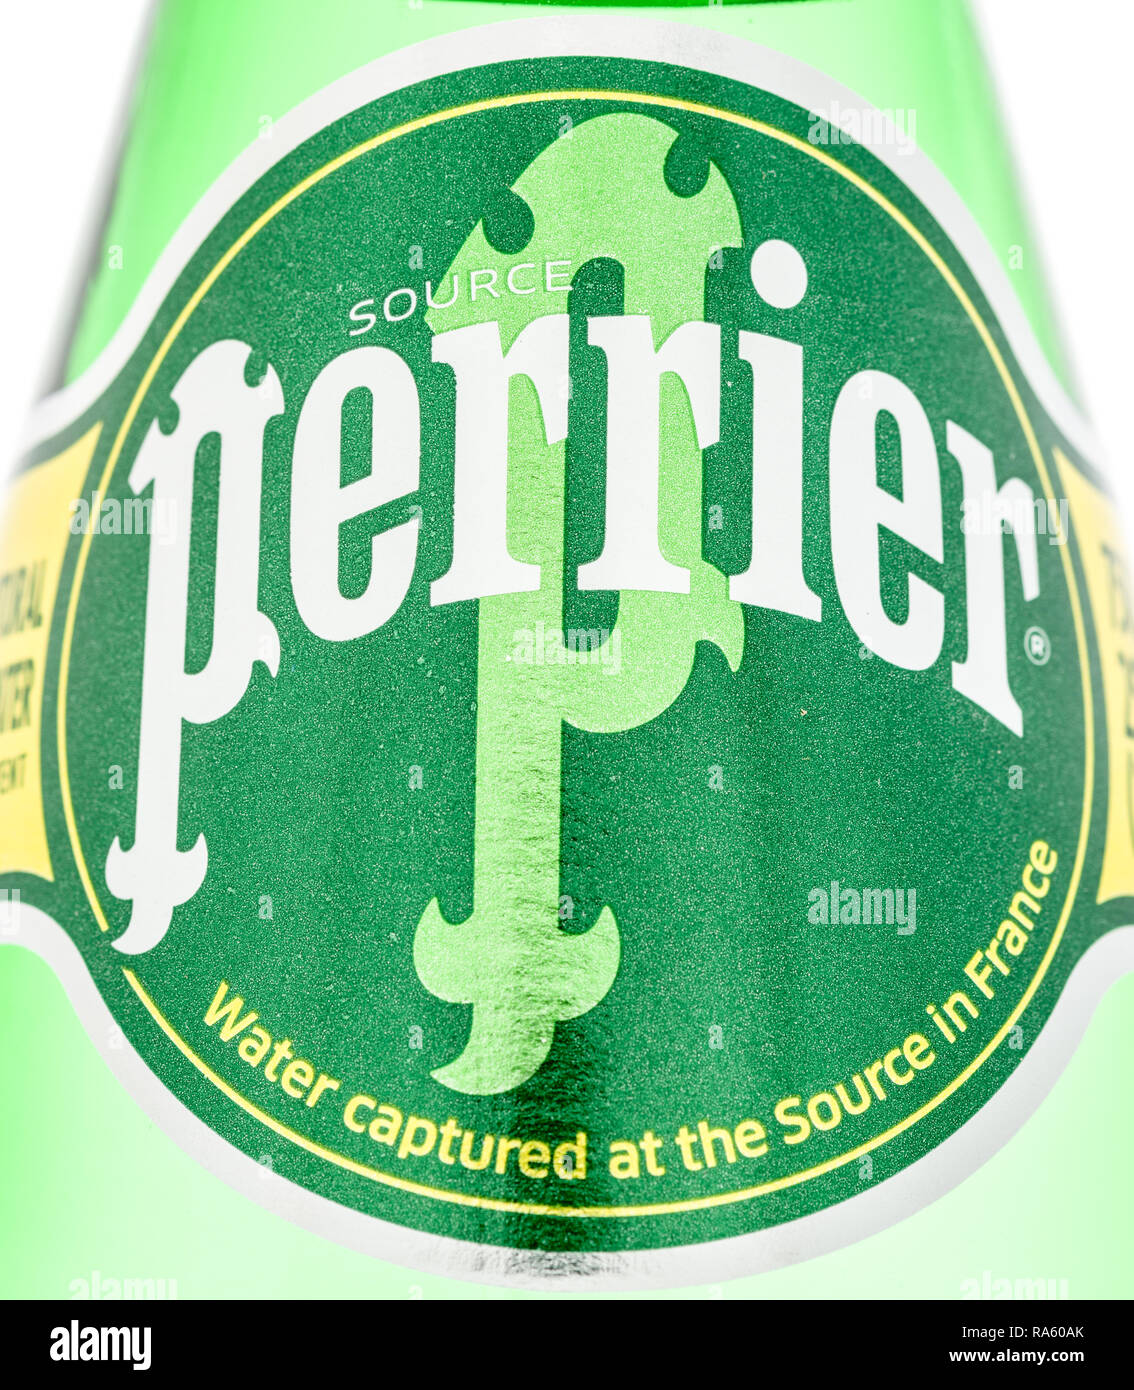 Winneconne, WI - 30 December 2018: A close up image of Perrier water bottle on an isolated background. Stock Photo